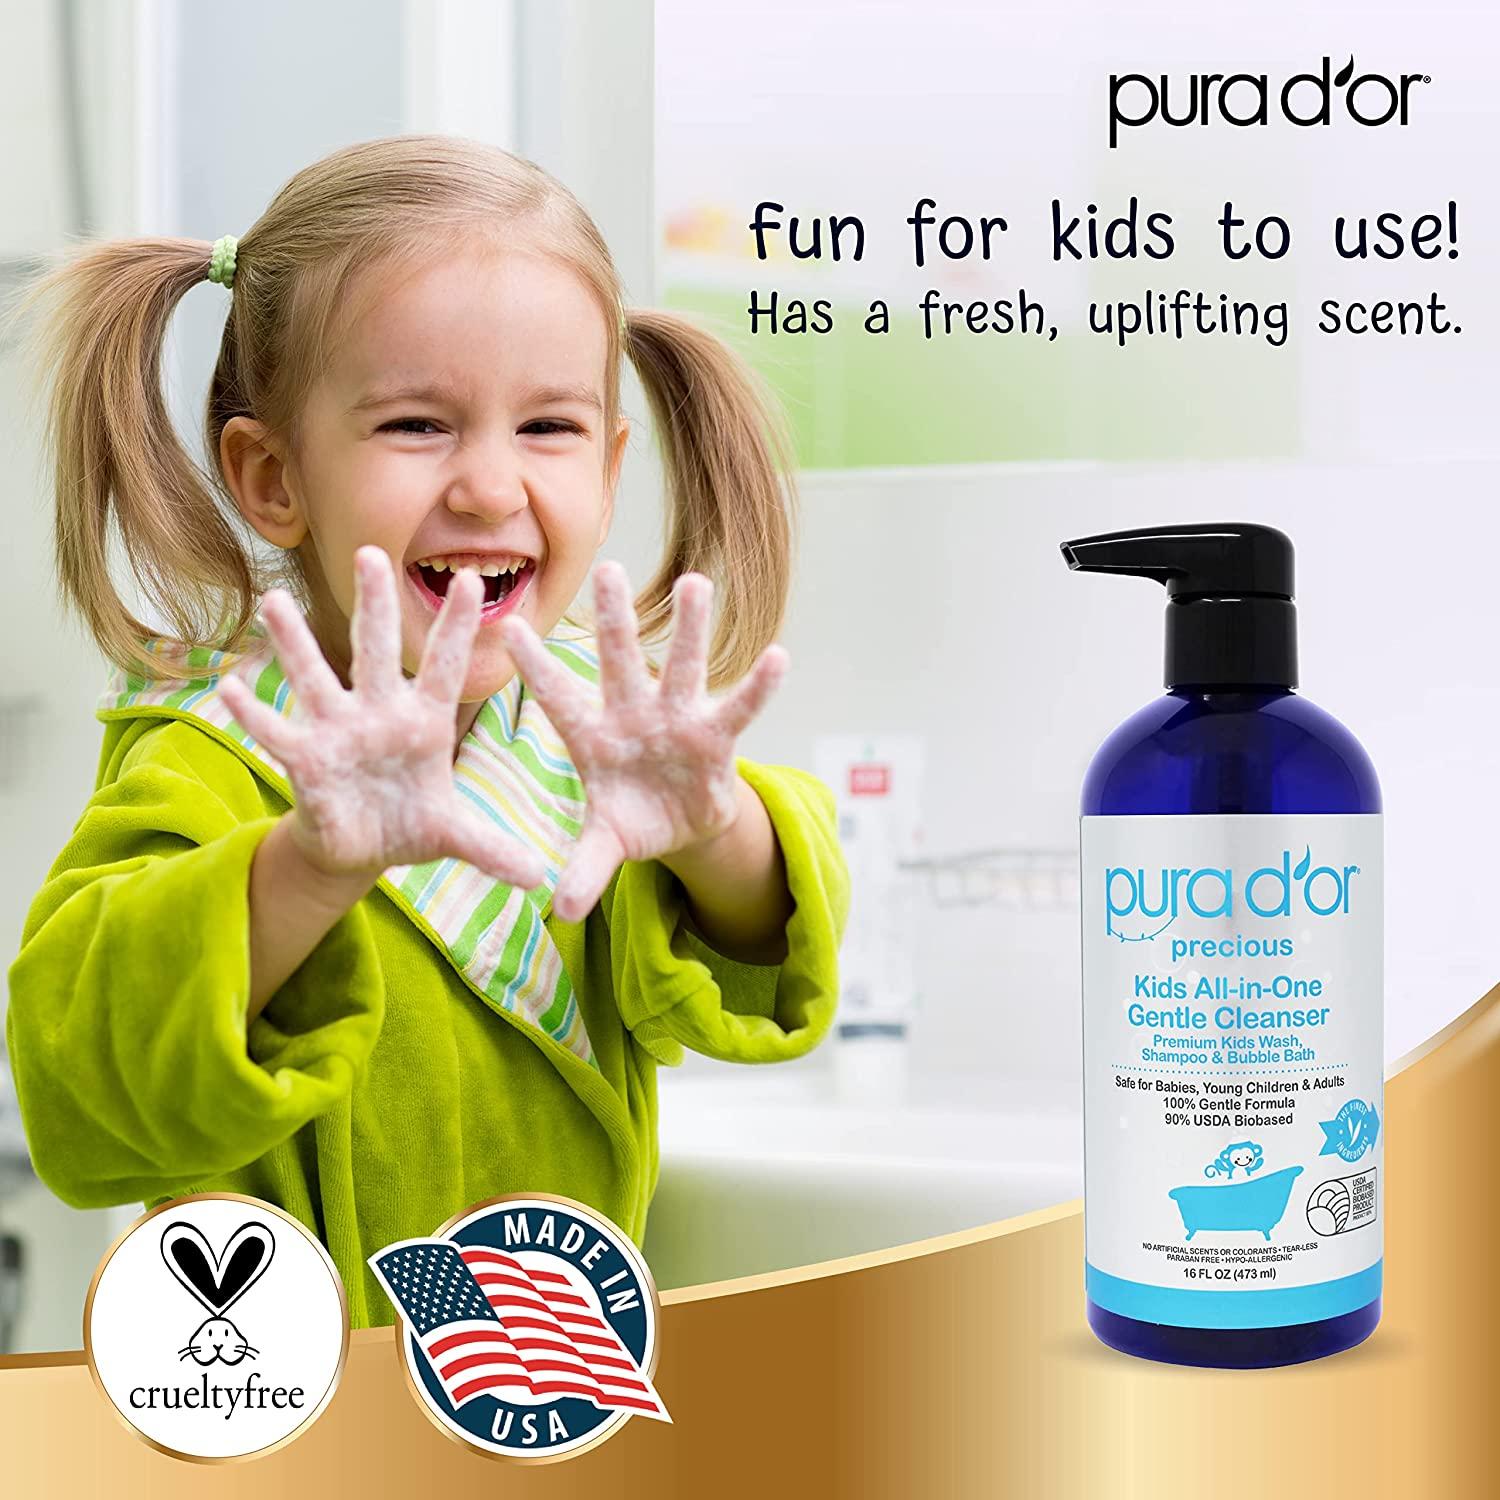 Mom Knows Best: How To Prevent Hair Loss With PURA D'OR